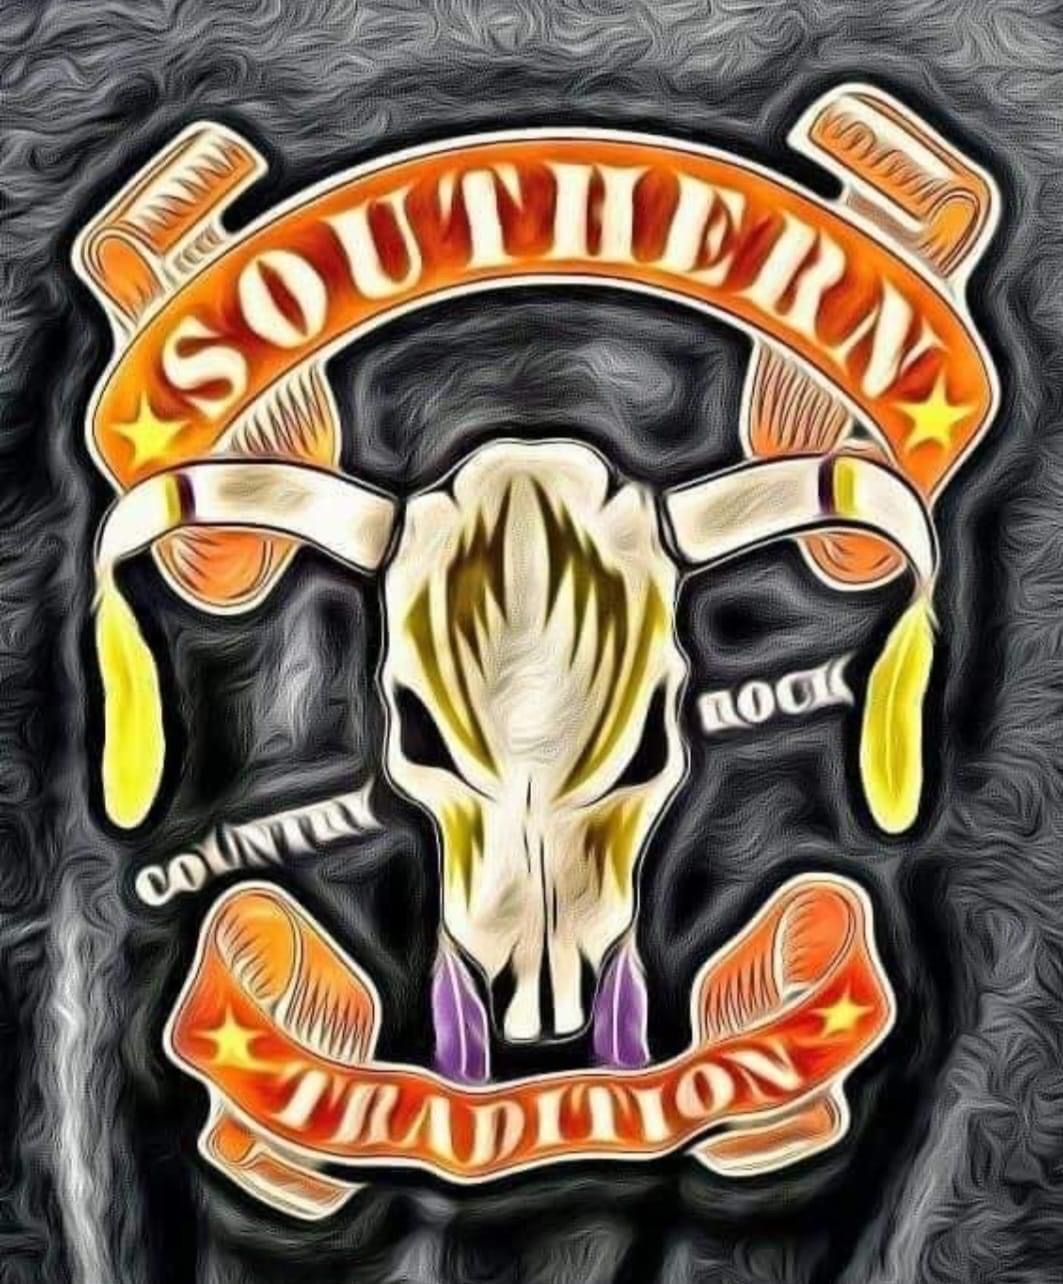 Southern Tradition Band @ Sue\u2019s